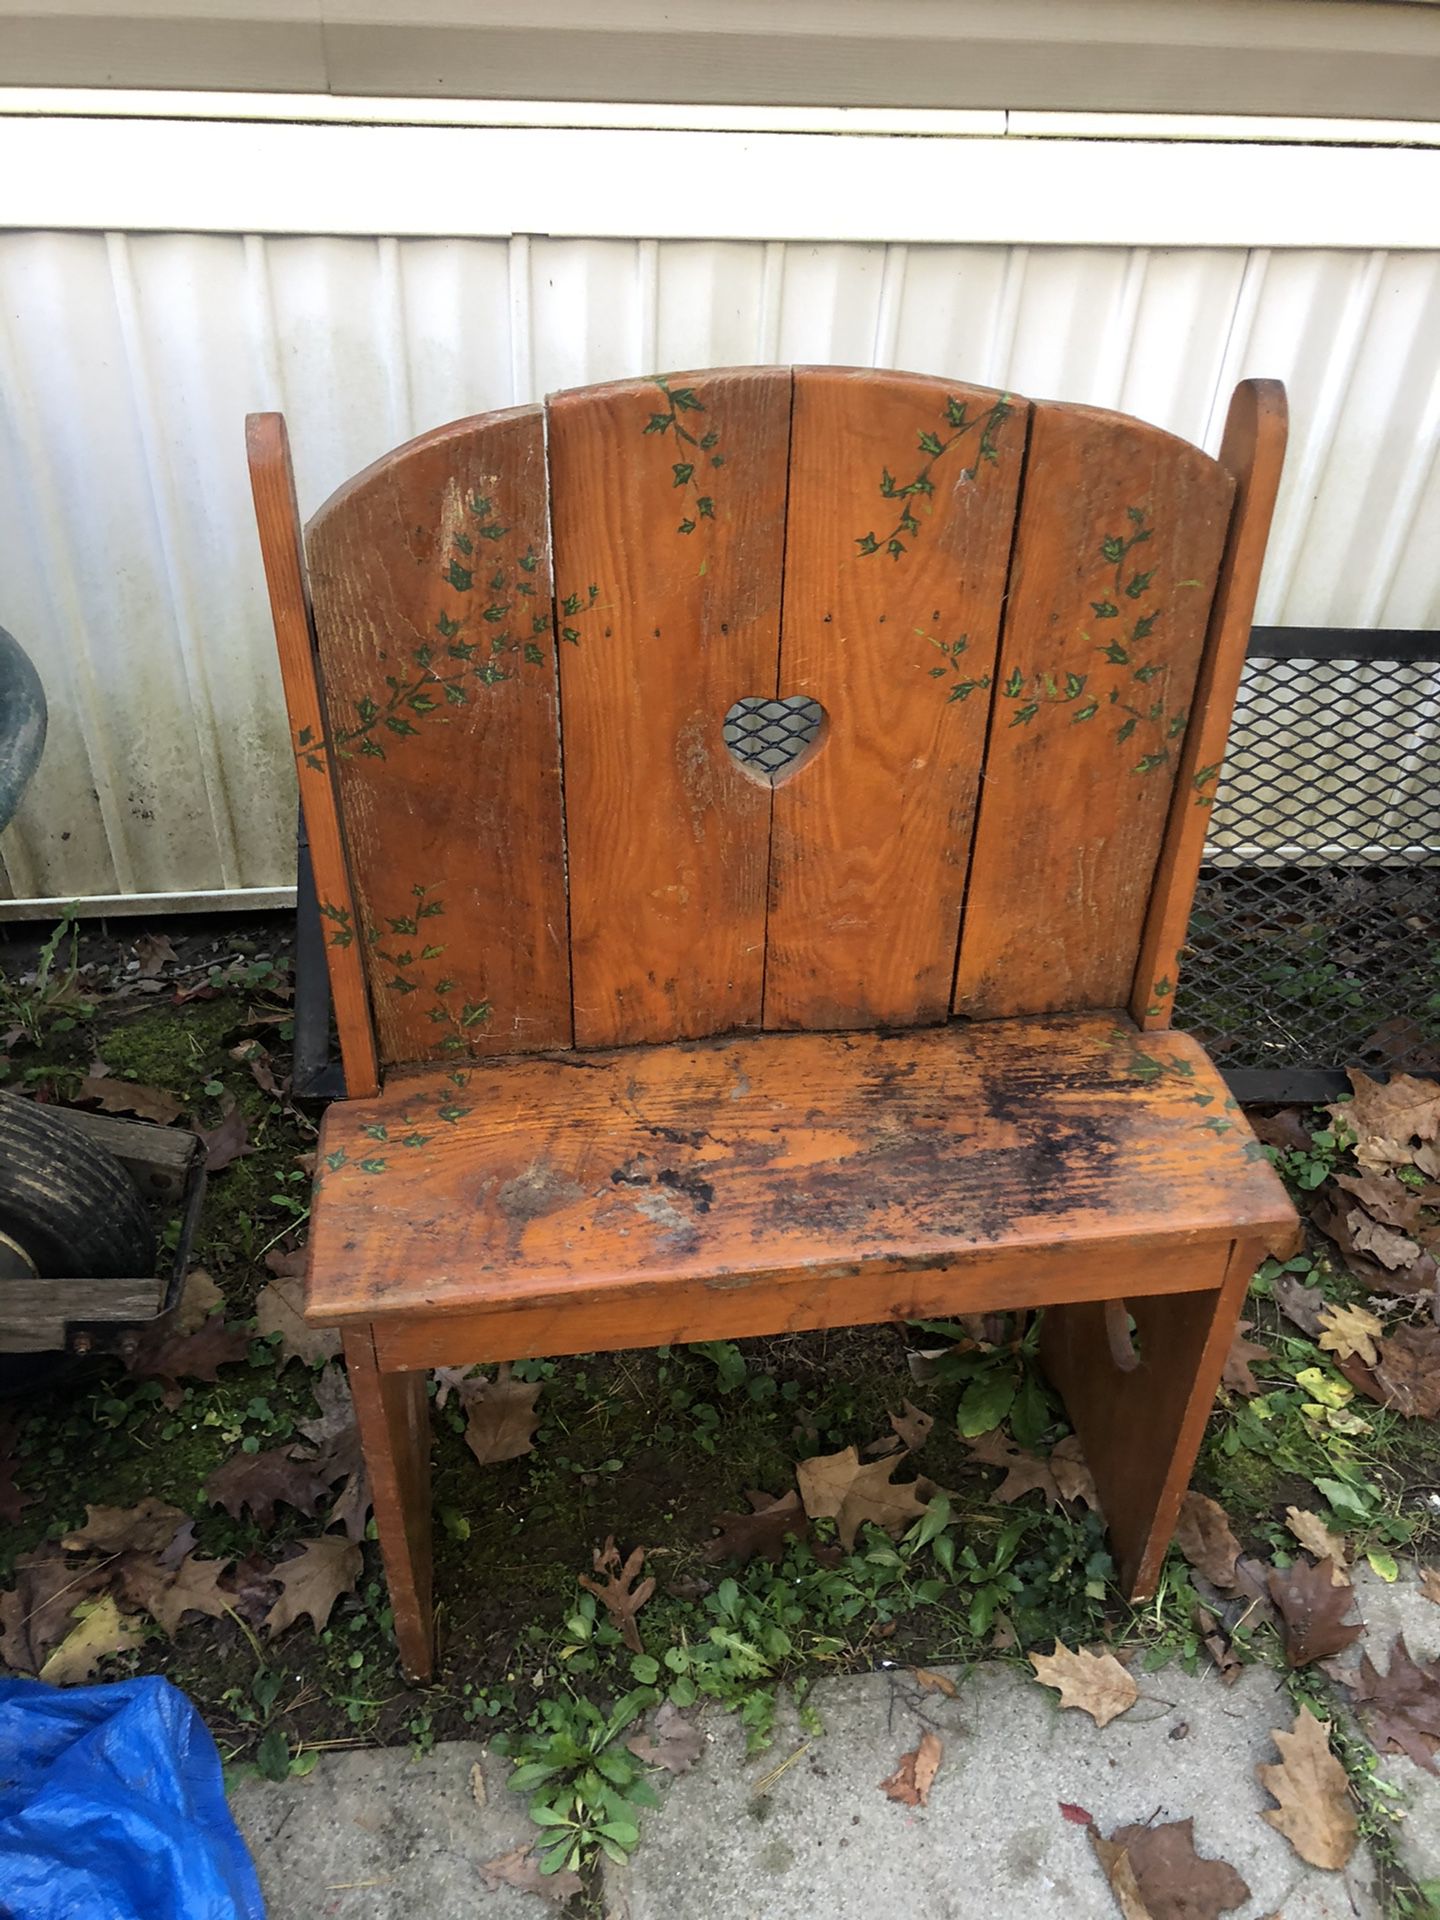  $20 Firm. Wooden Plant Bench Seat 